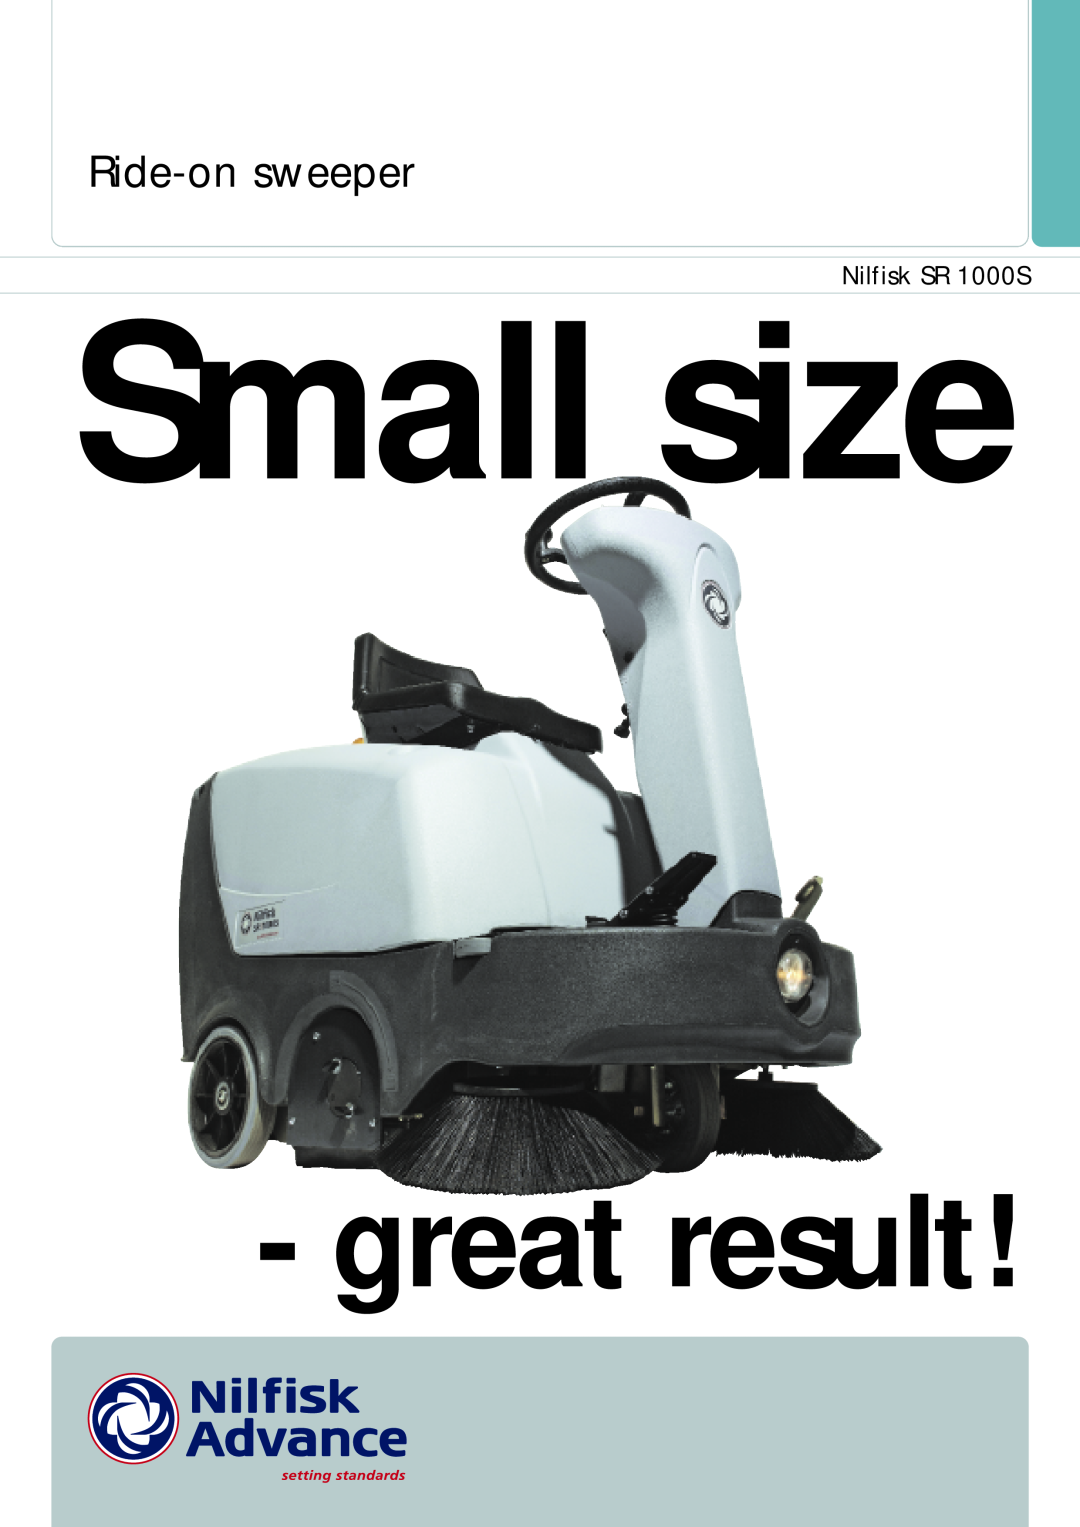 Nilfisk-ALTO SR 1000S P, SR 1000S B technical specifications Ride-onsweeper, Small size, great result, Nilfisk SR 1000S 